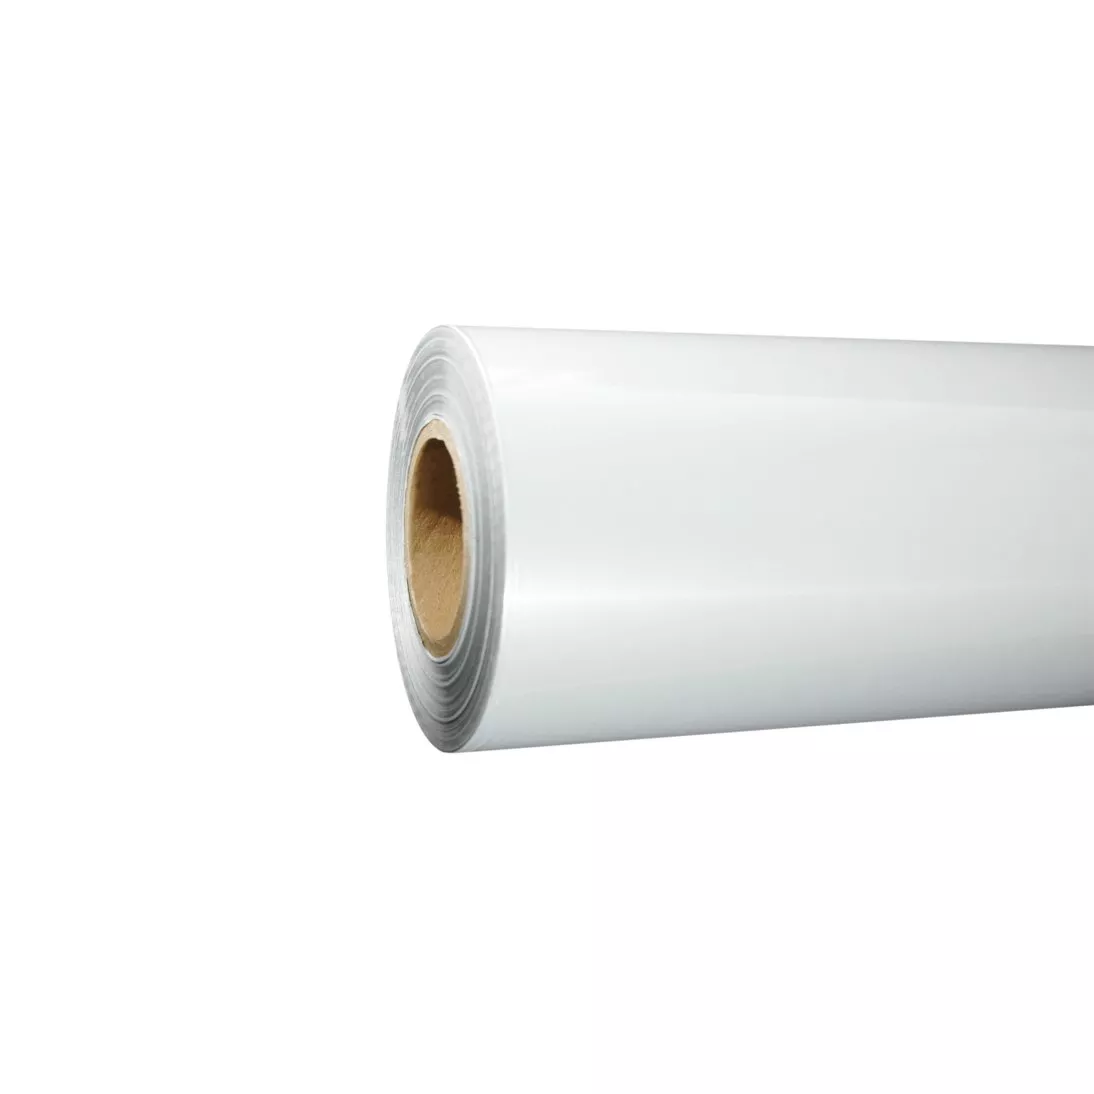 3M™ Venture Tape™ Non-Adhesive Cryogenic Jacketing 1555U, Silver, 23 1/2
in x 250 yd, 4 rolls per pallet (1 roll per case)